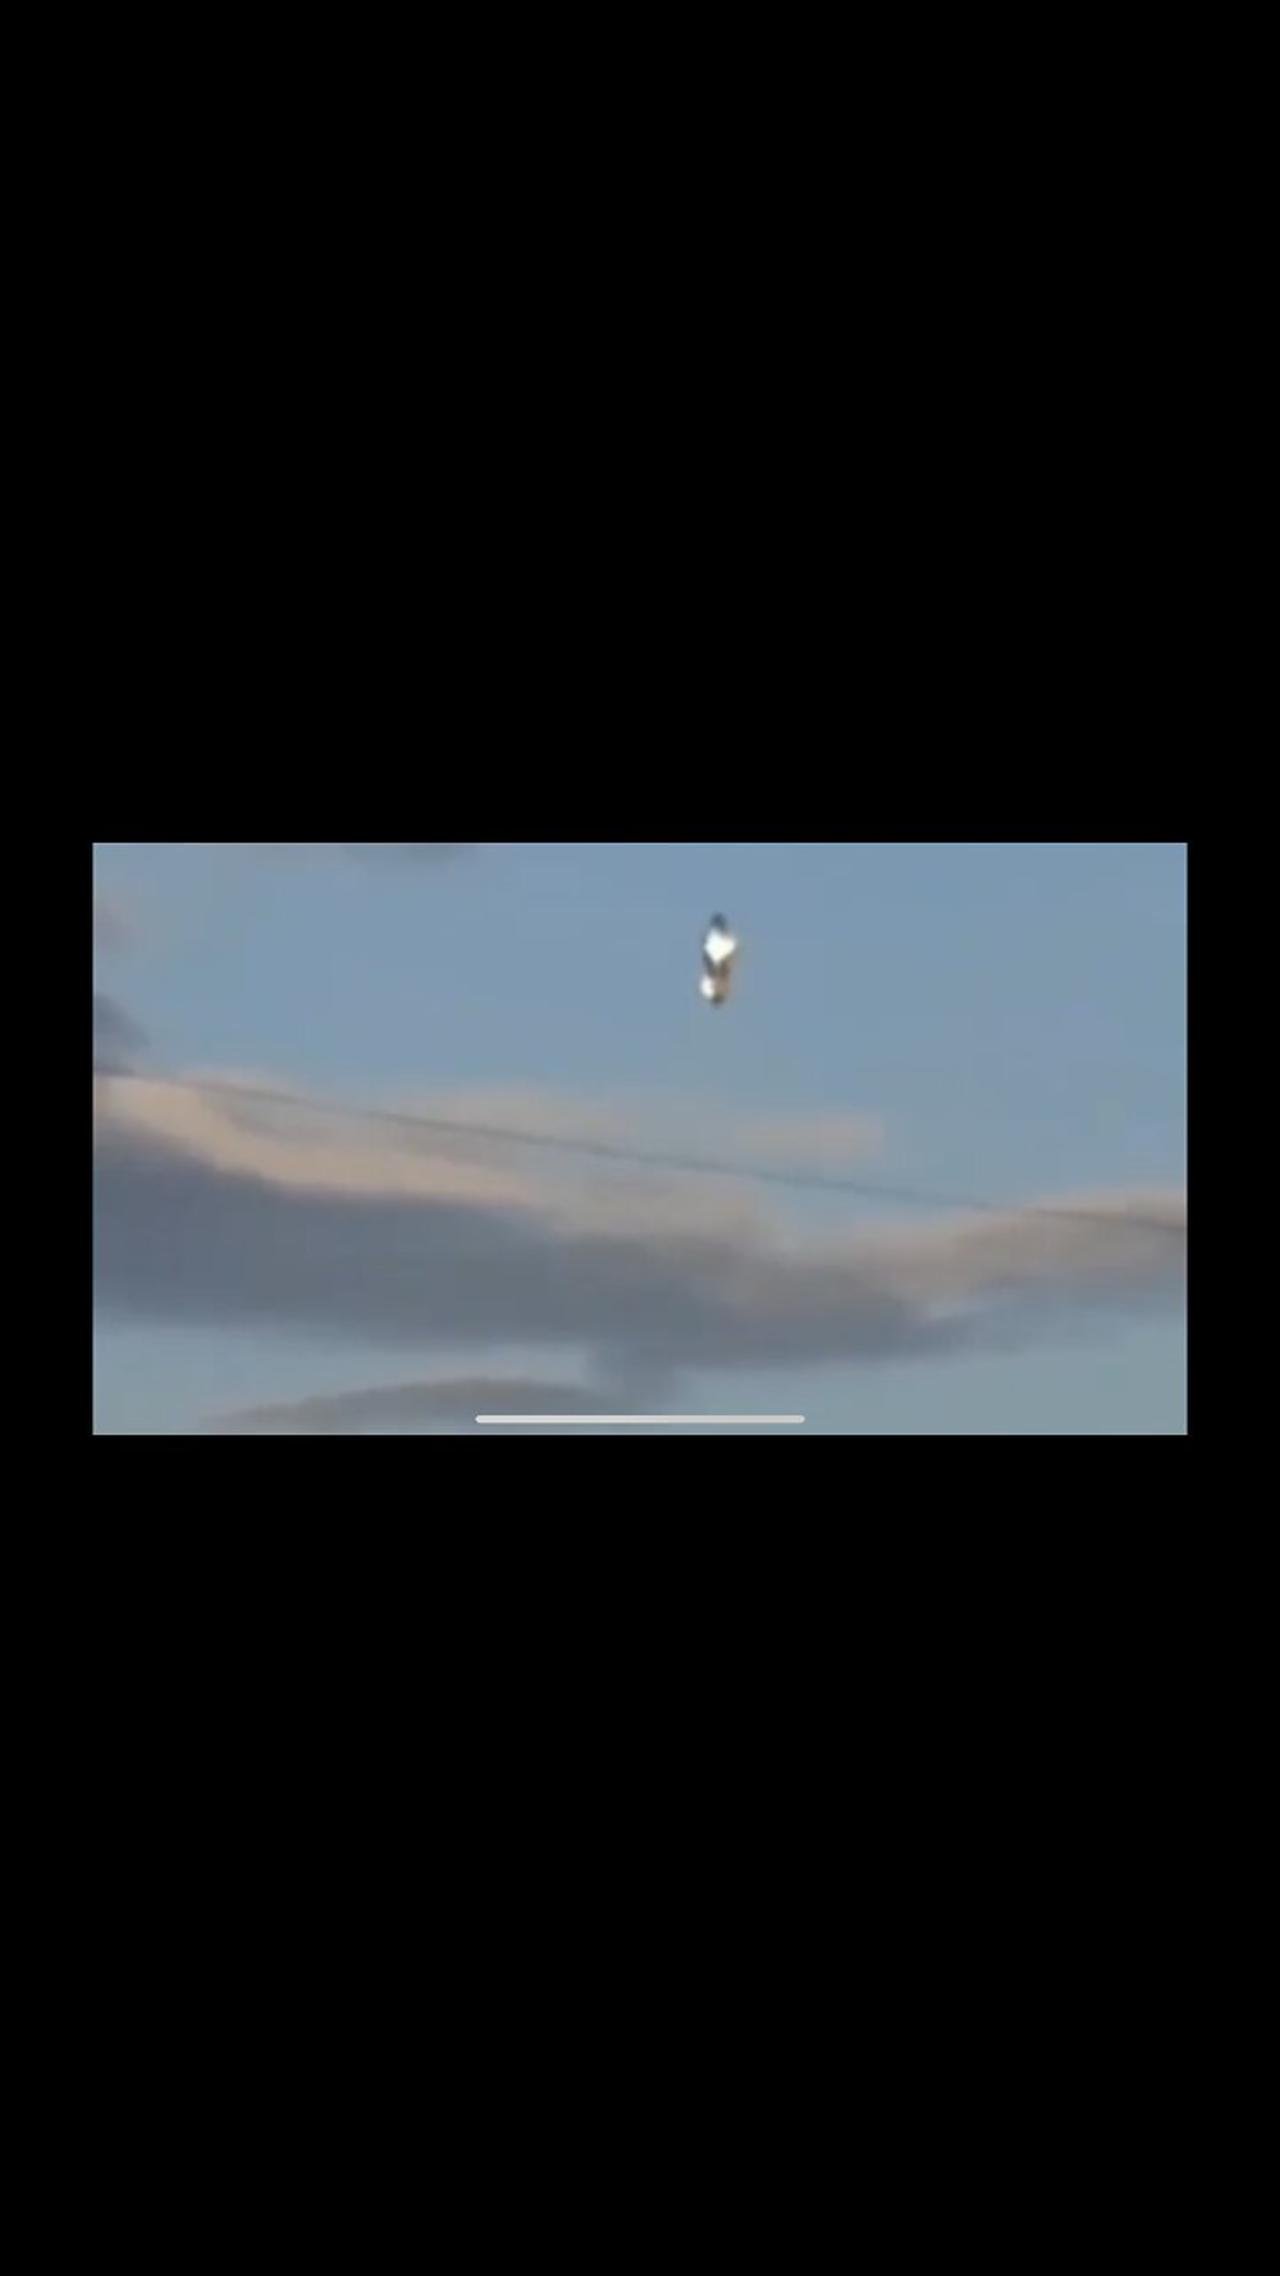 NEW UFO over Roswell New Mexico Video # 3